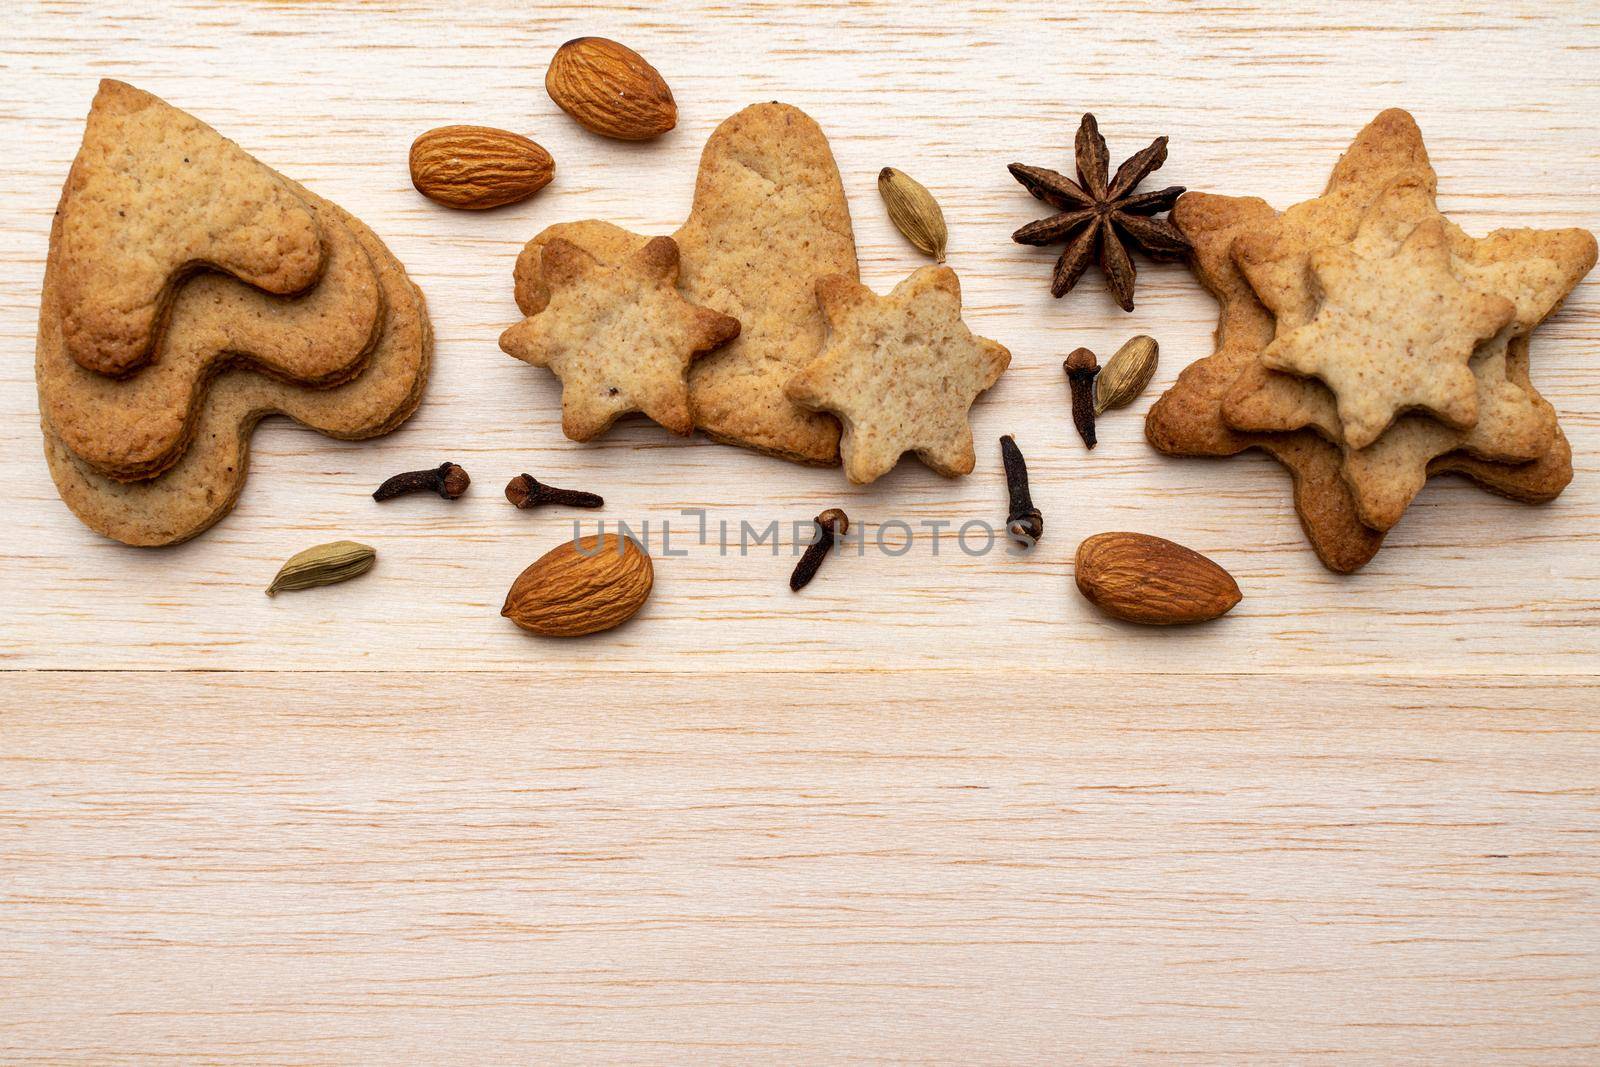 Christmas holiday background with homemade cookies on a wooden table. Cloves, star anise, almonds. Copy the location for the text